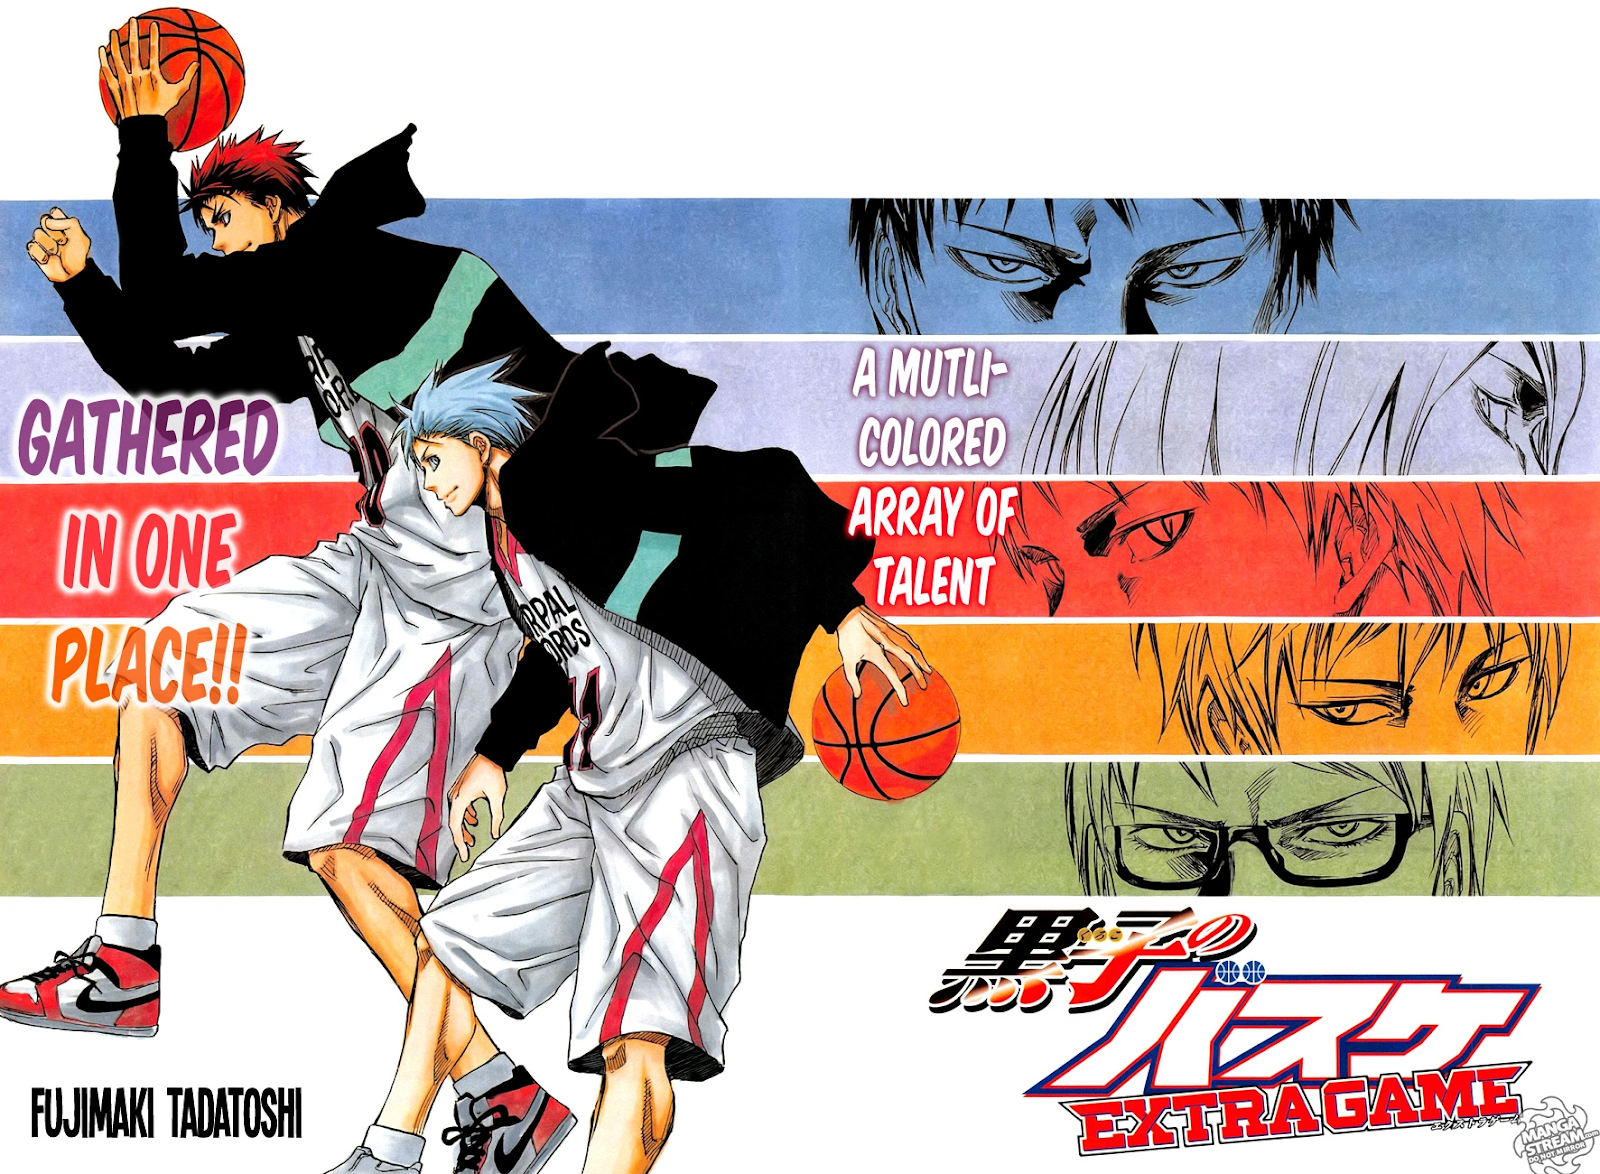 As Kagami finds that the enigmatic Kuroko was the "Secret 6th Player" of the unstoppable (but now parted) junior-high squad known as the "Generation of Miracles